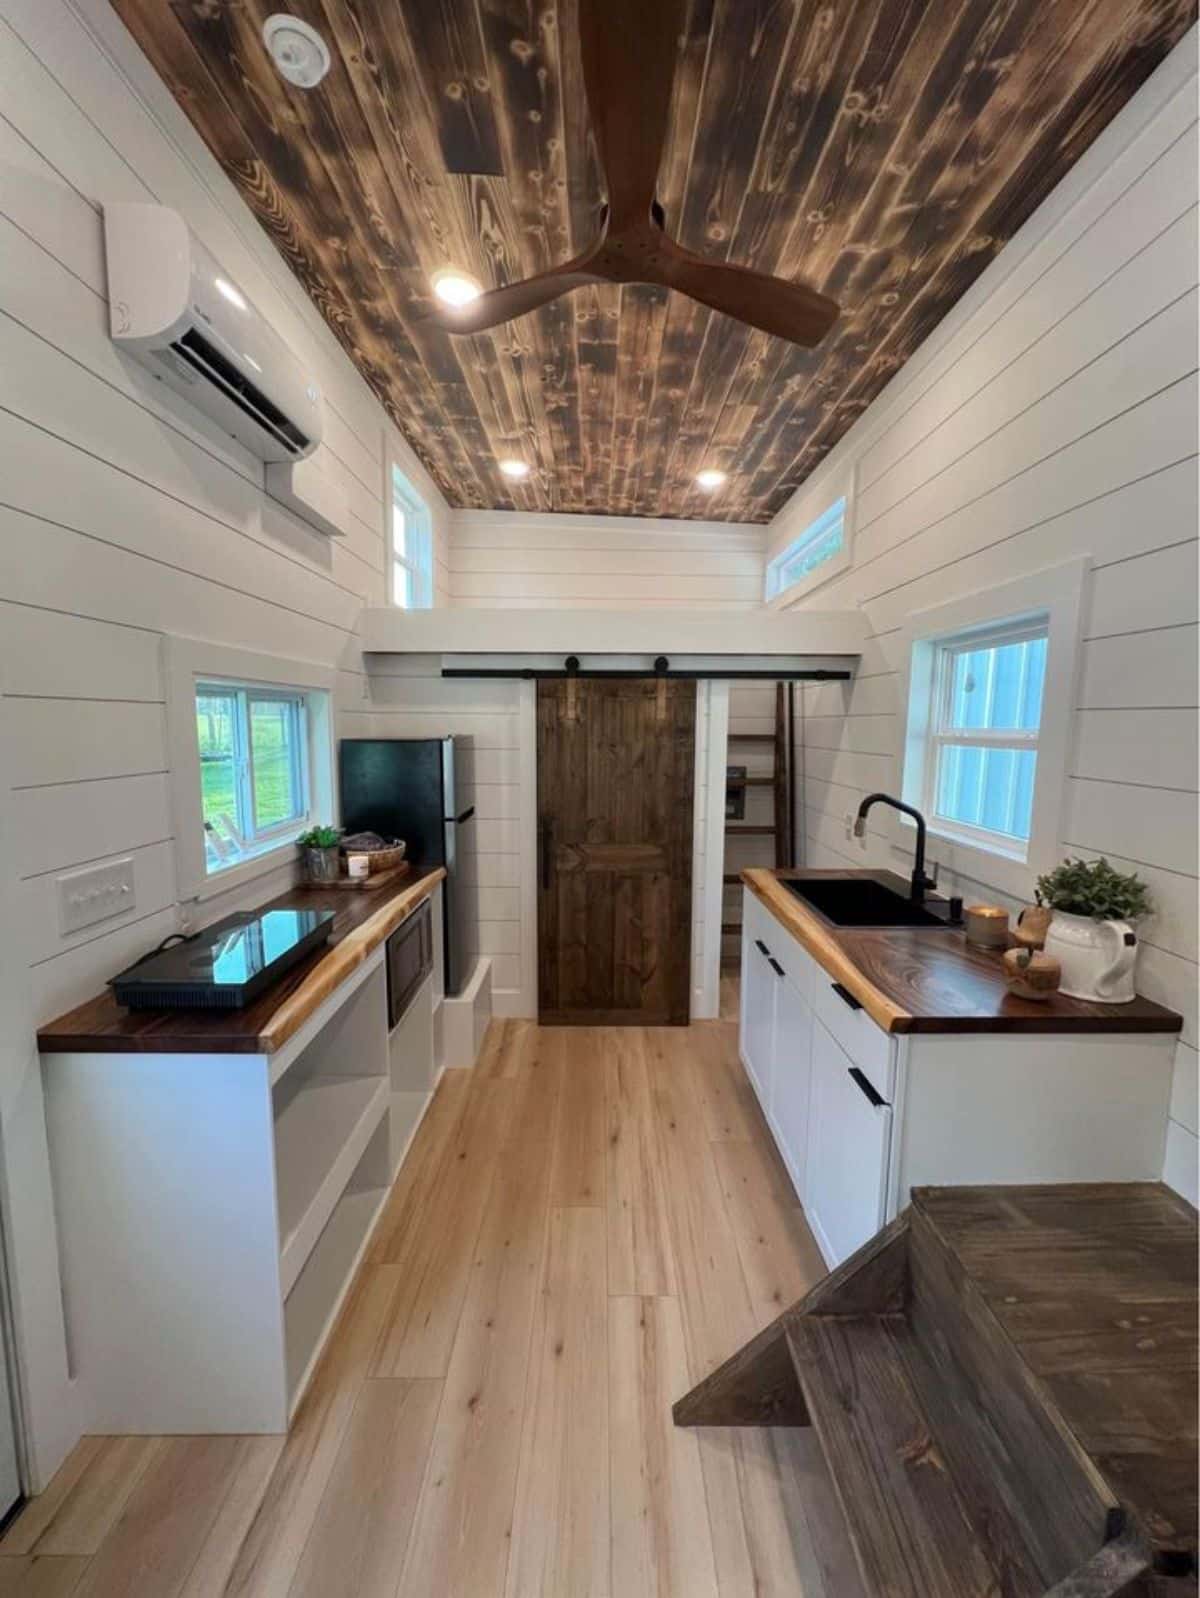 Aesthetic interiors of 24’ Tiny House With Dual Lofts